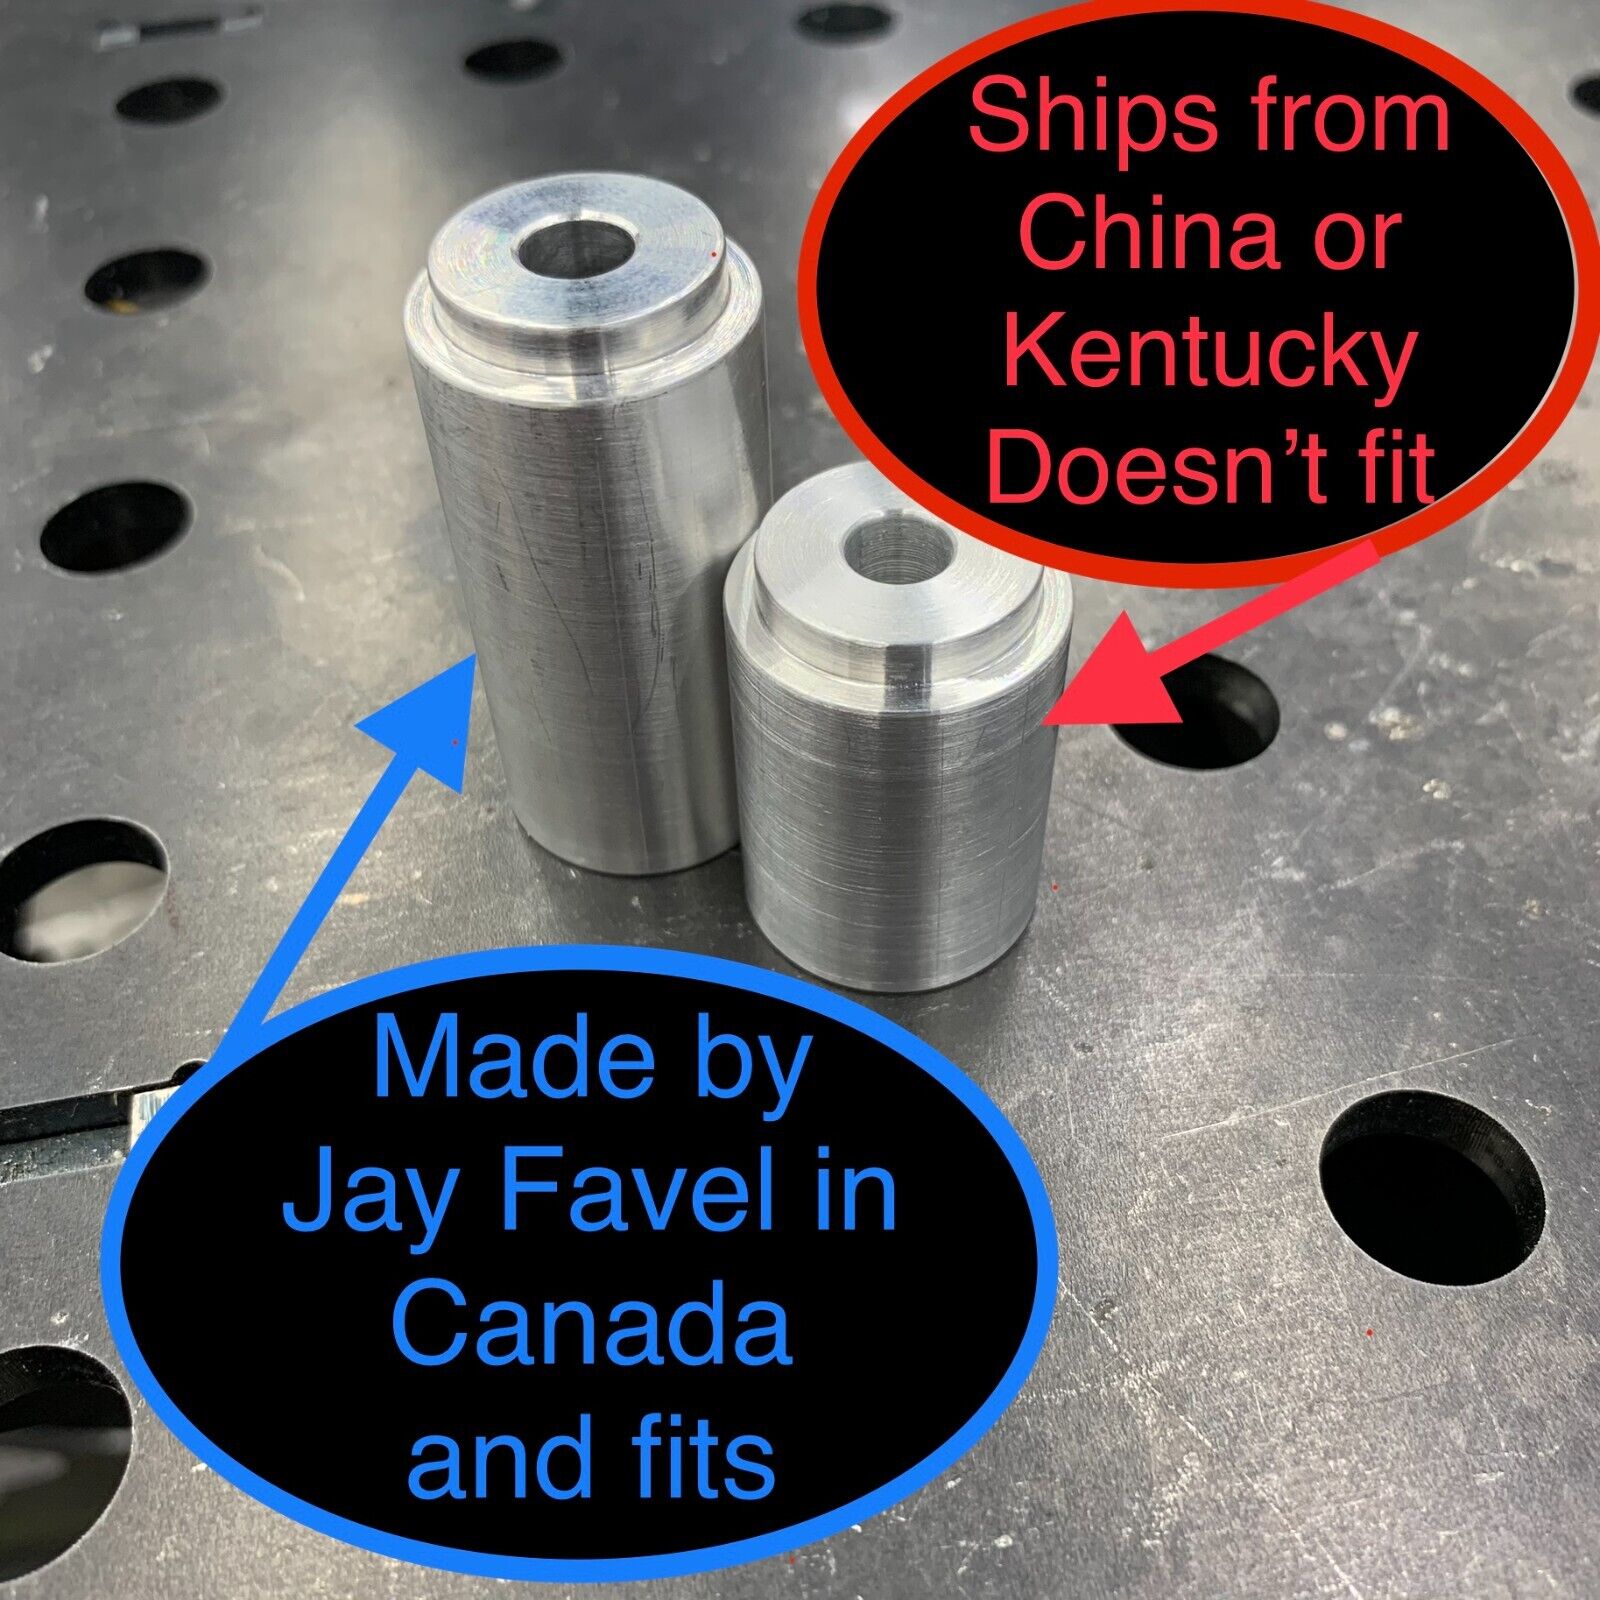 Jay Favel First Gen Ski-Doo Rev Floating Clutch Spacer SkiDoo Fits 03 to 09